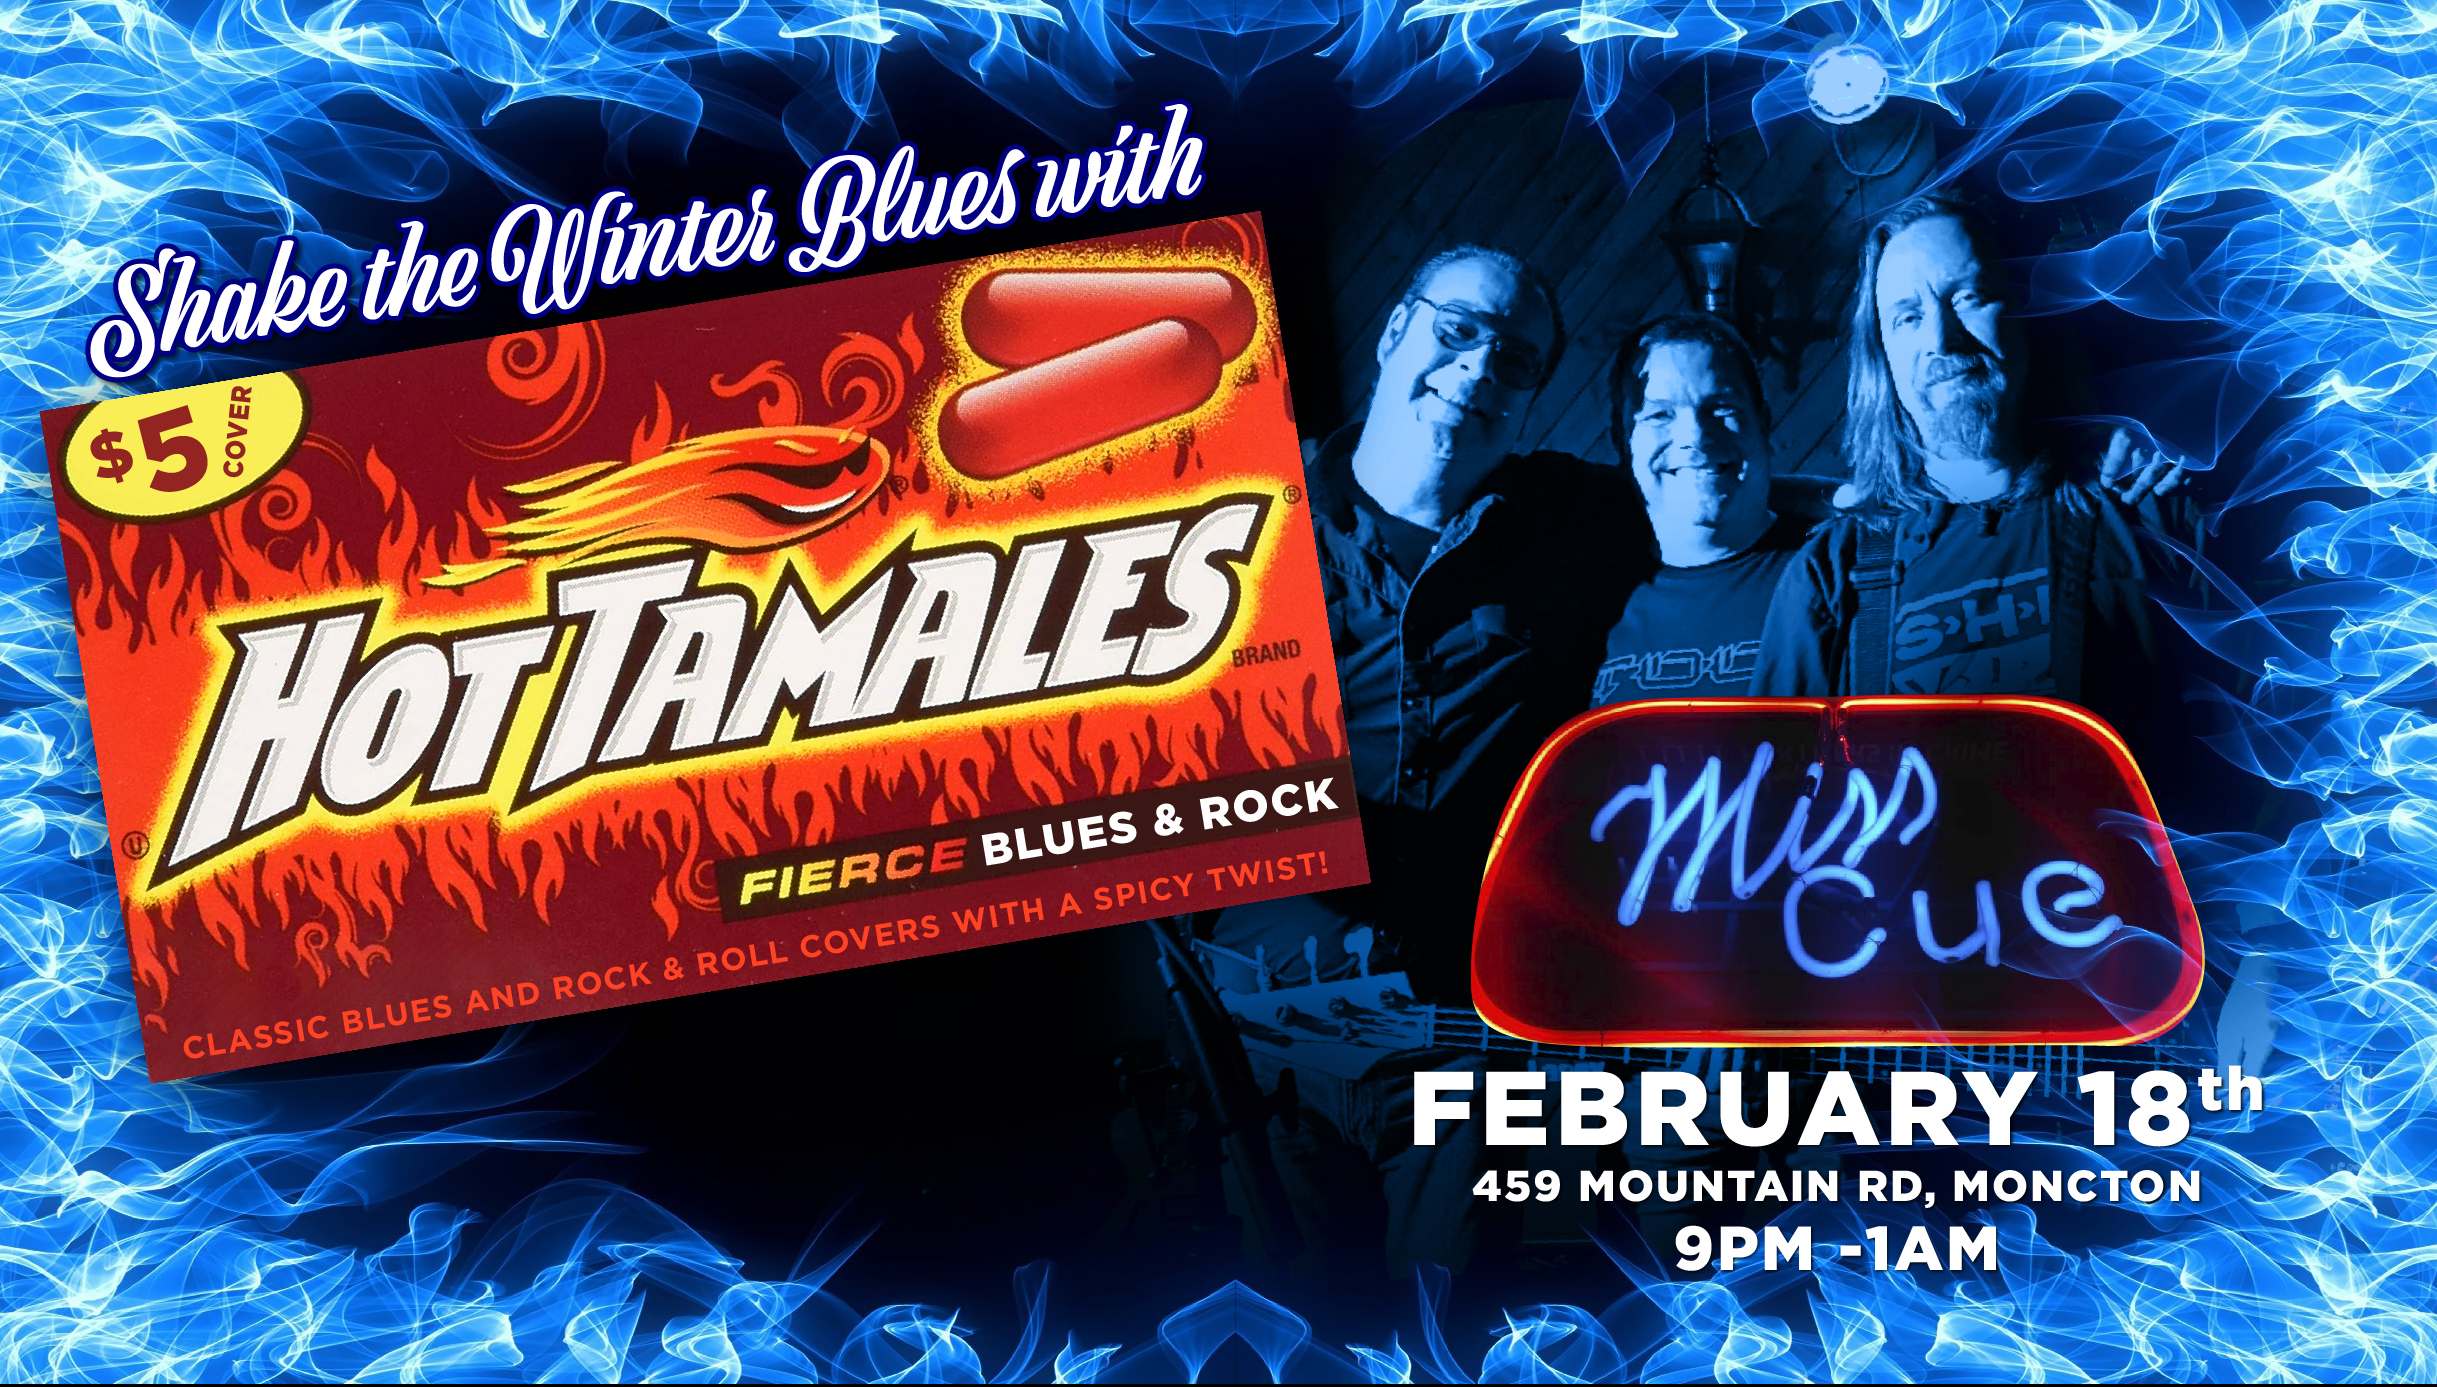 Shake the Winter Blues with the Hot Tamales!!